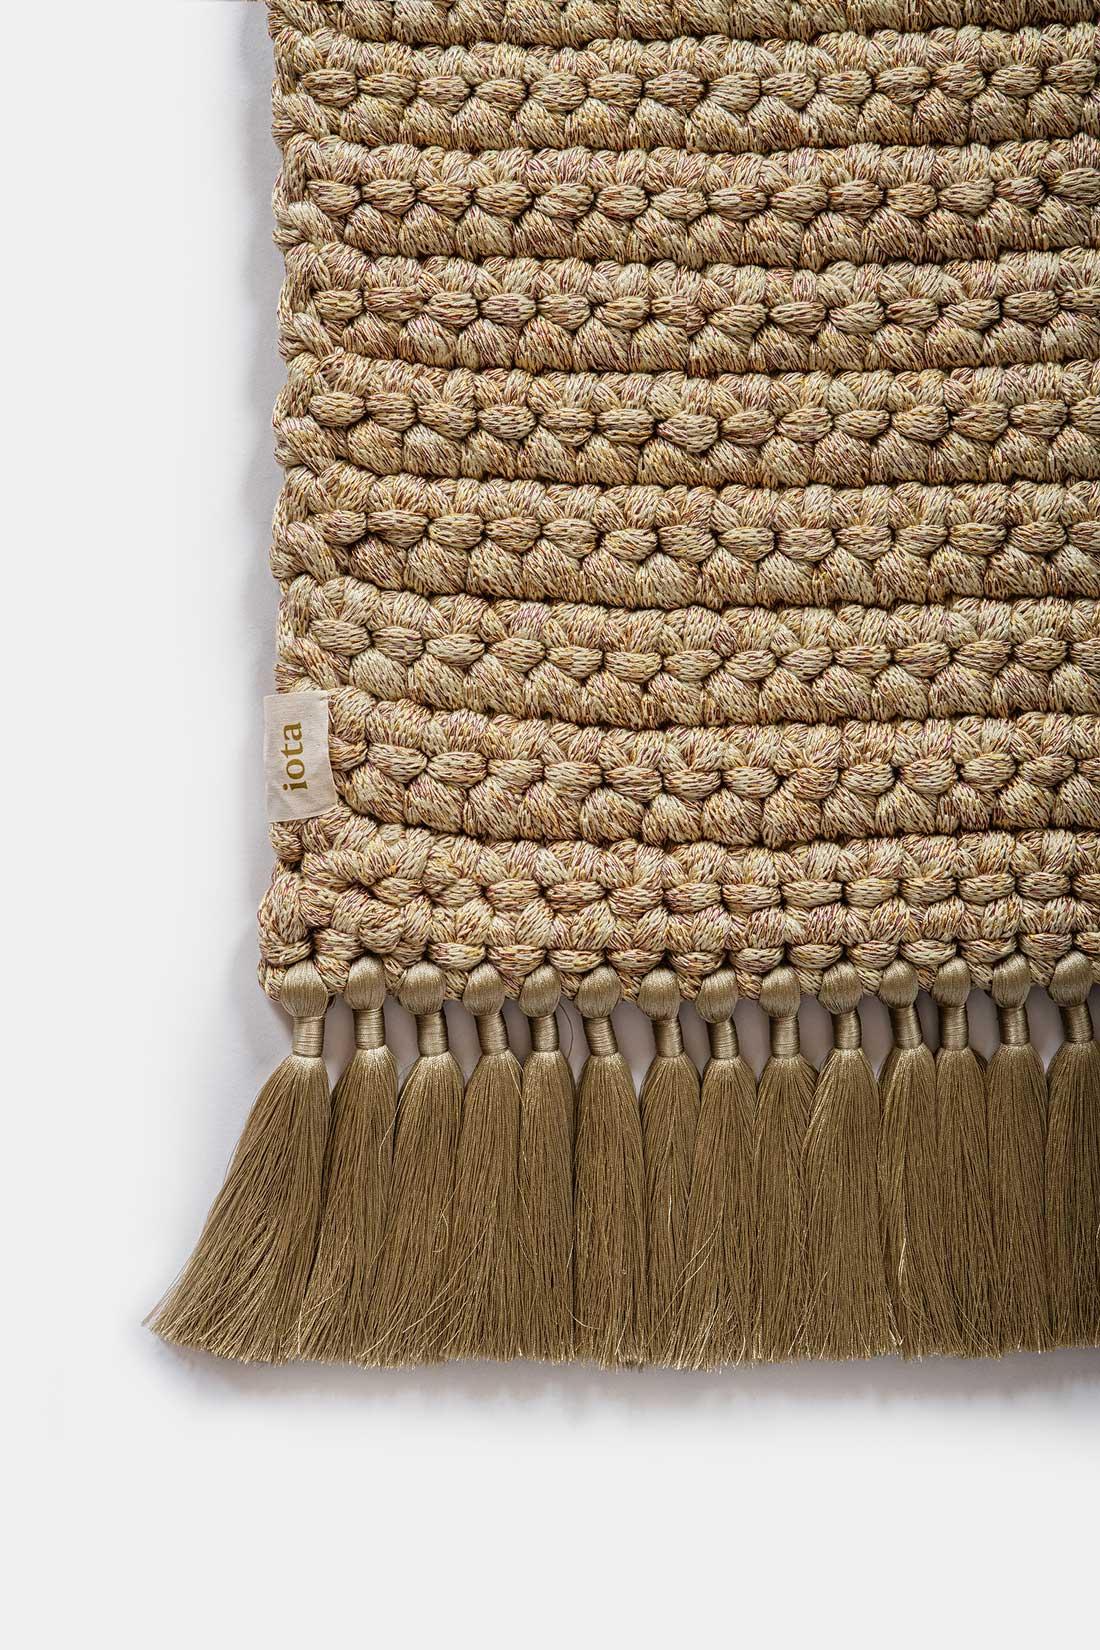 Israeli Handmade Crochet XL Thick Rug in Golden Beige Pink Made of Cotton & Polyester For Sale